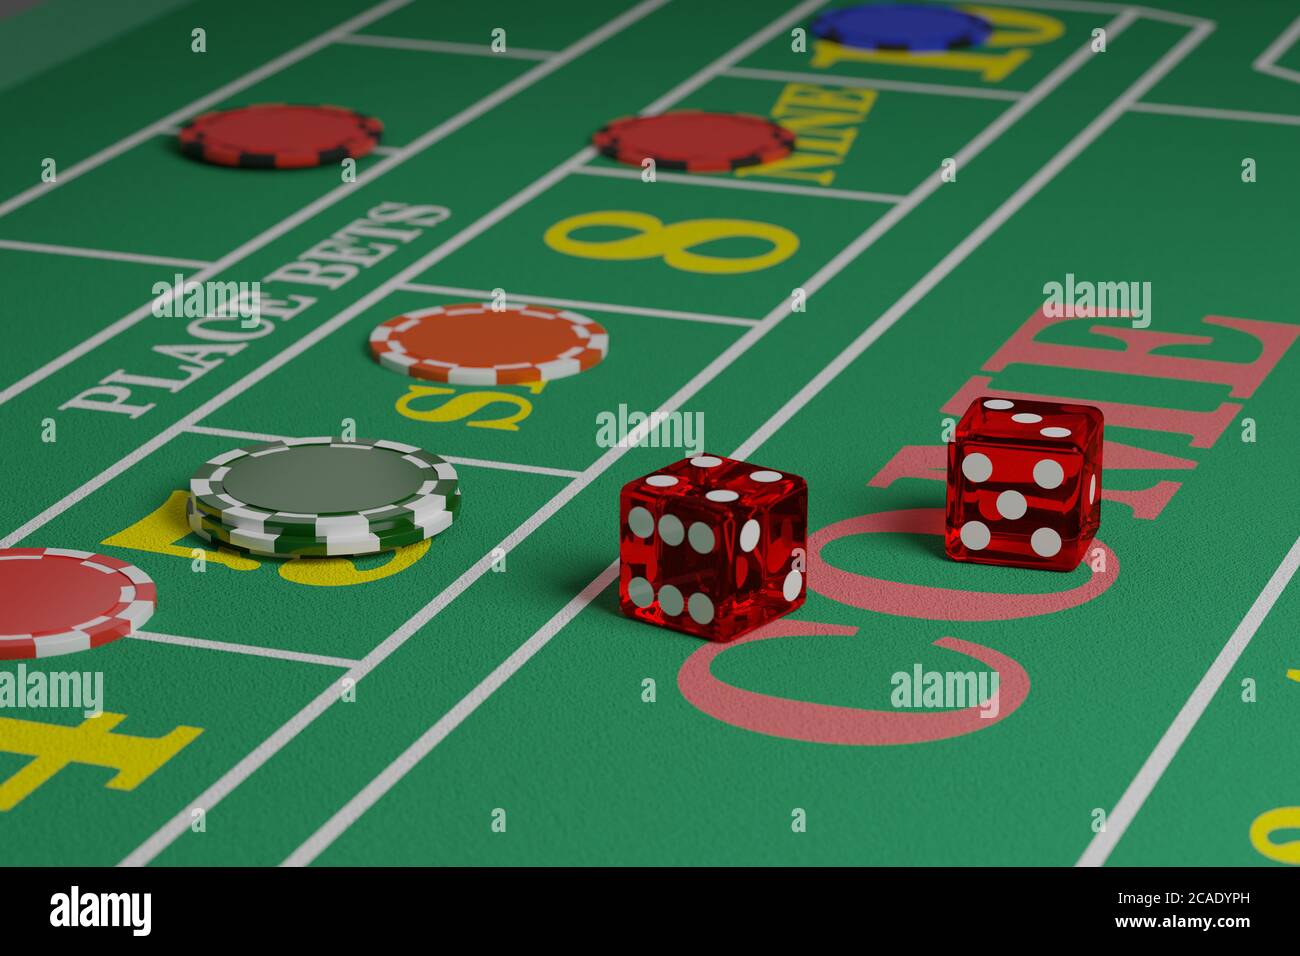 Craps tables inside Bally's Las Vegas Hotel and Casino. News Photo - Getty  Images